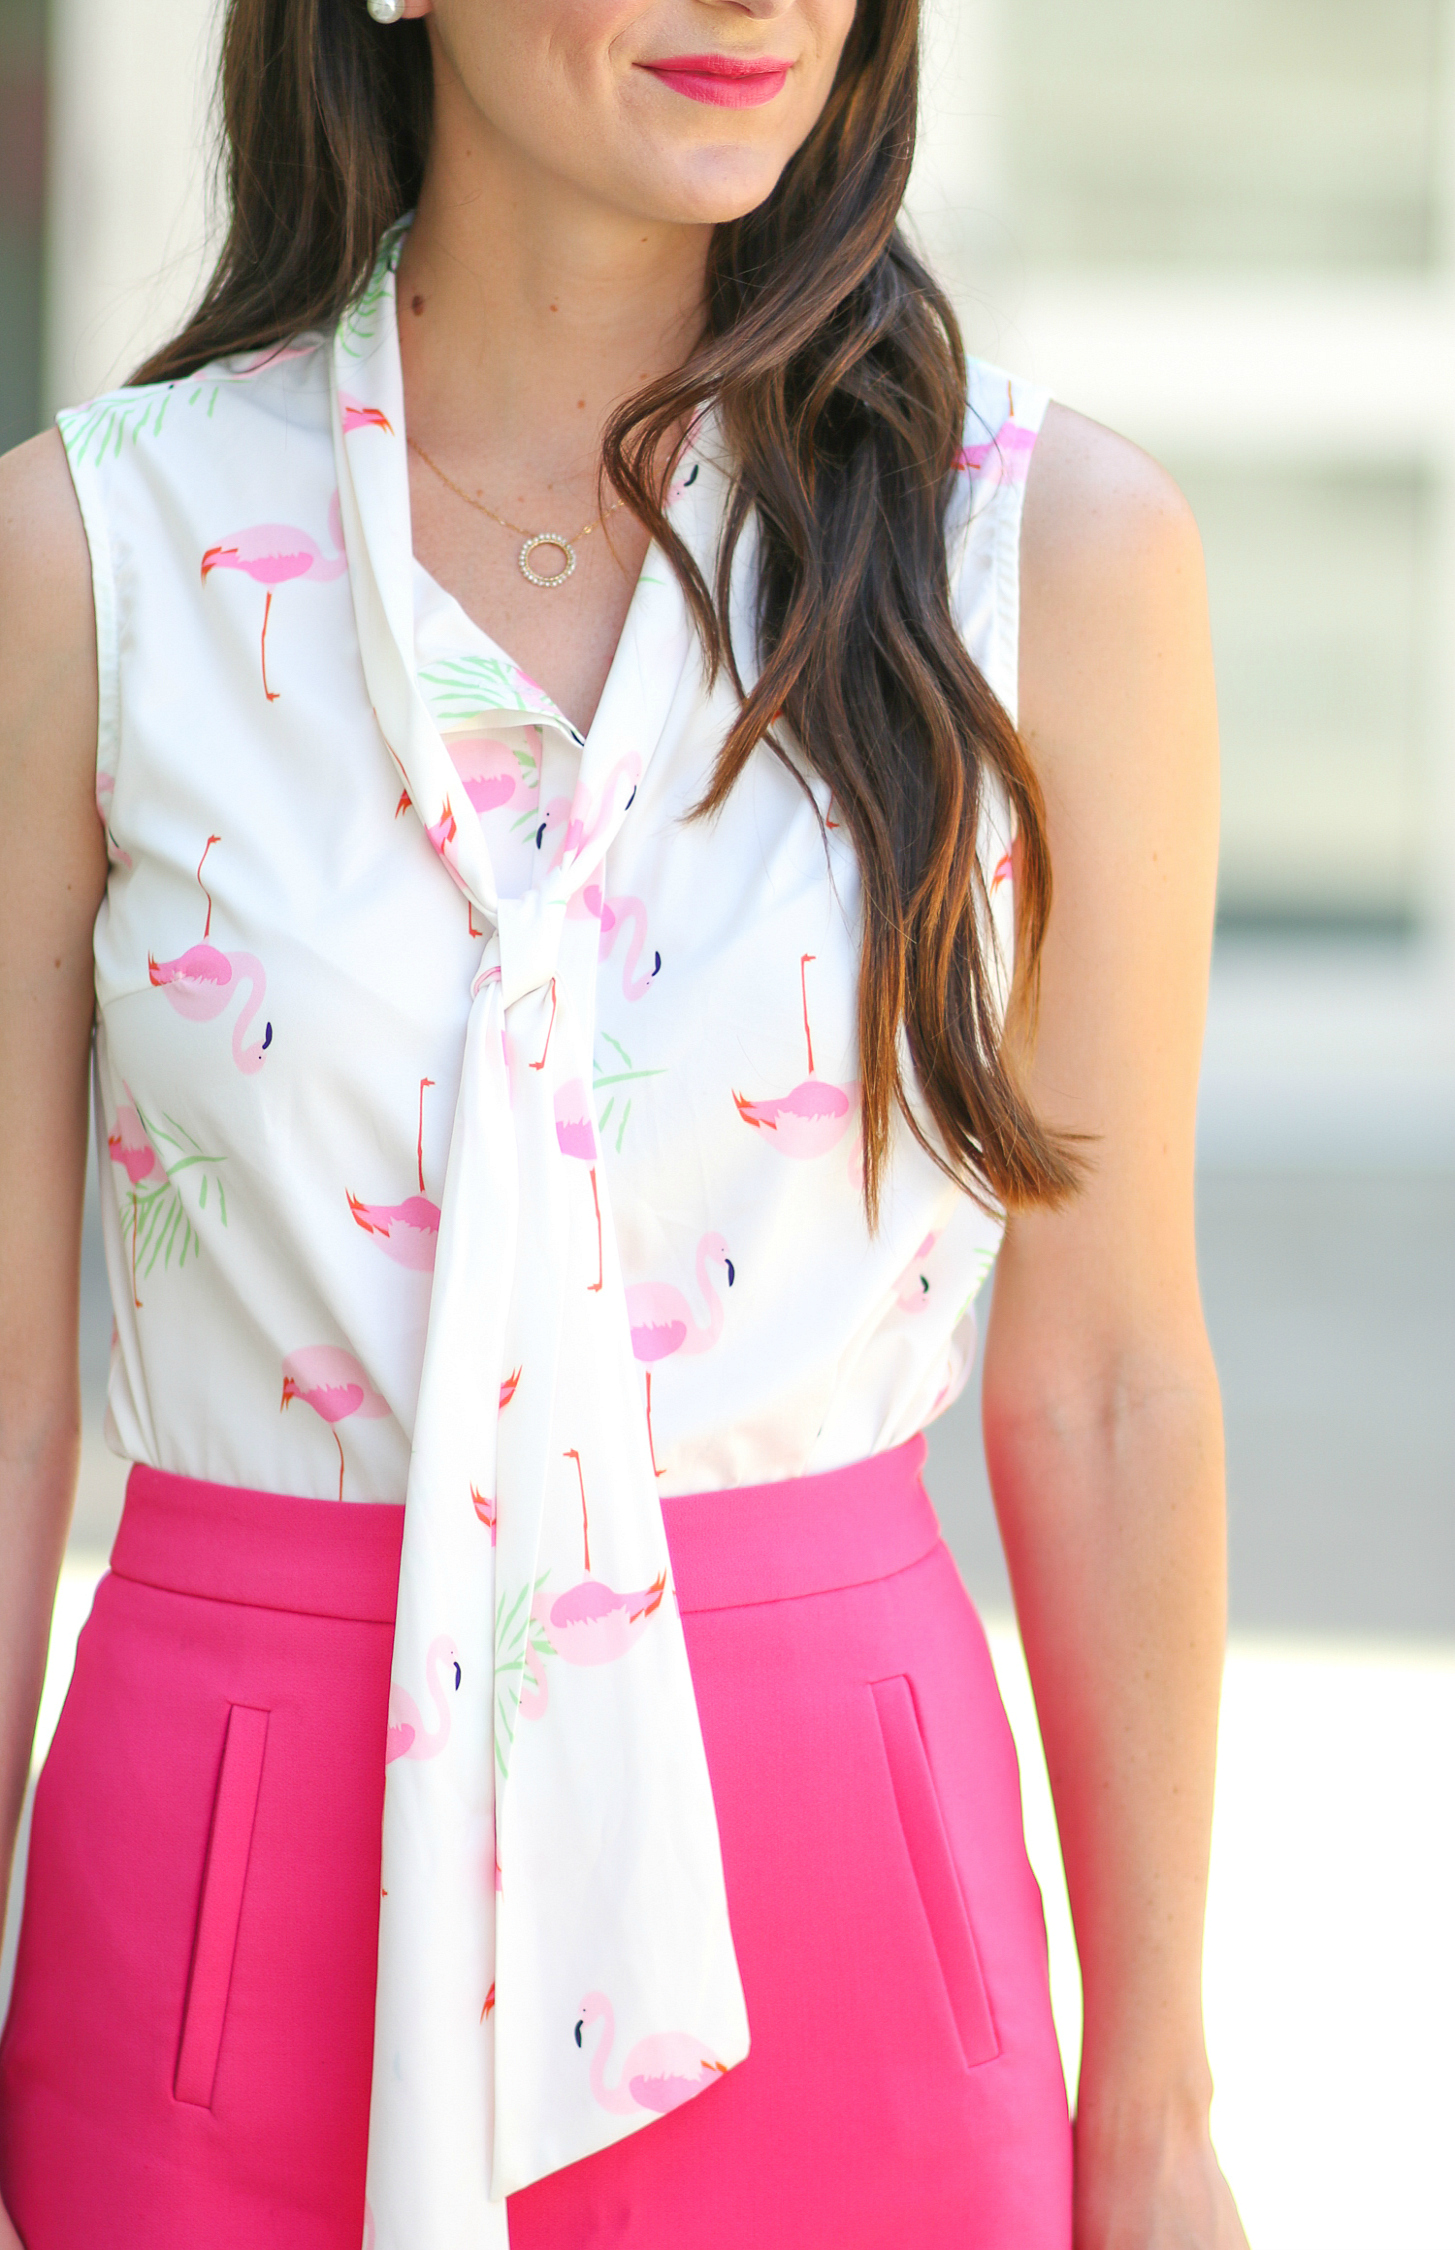 Goodnight Macaroon flamingo blouse, C.Wonder hot pink mini skirt, and nude patent leather heels plus a round-up of 29 fun flamingo gift ideas for summer lovers